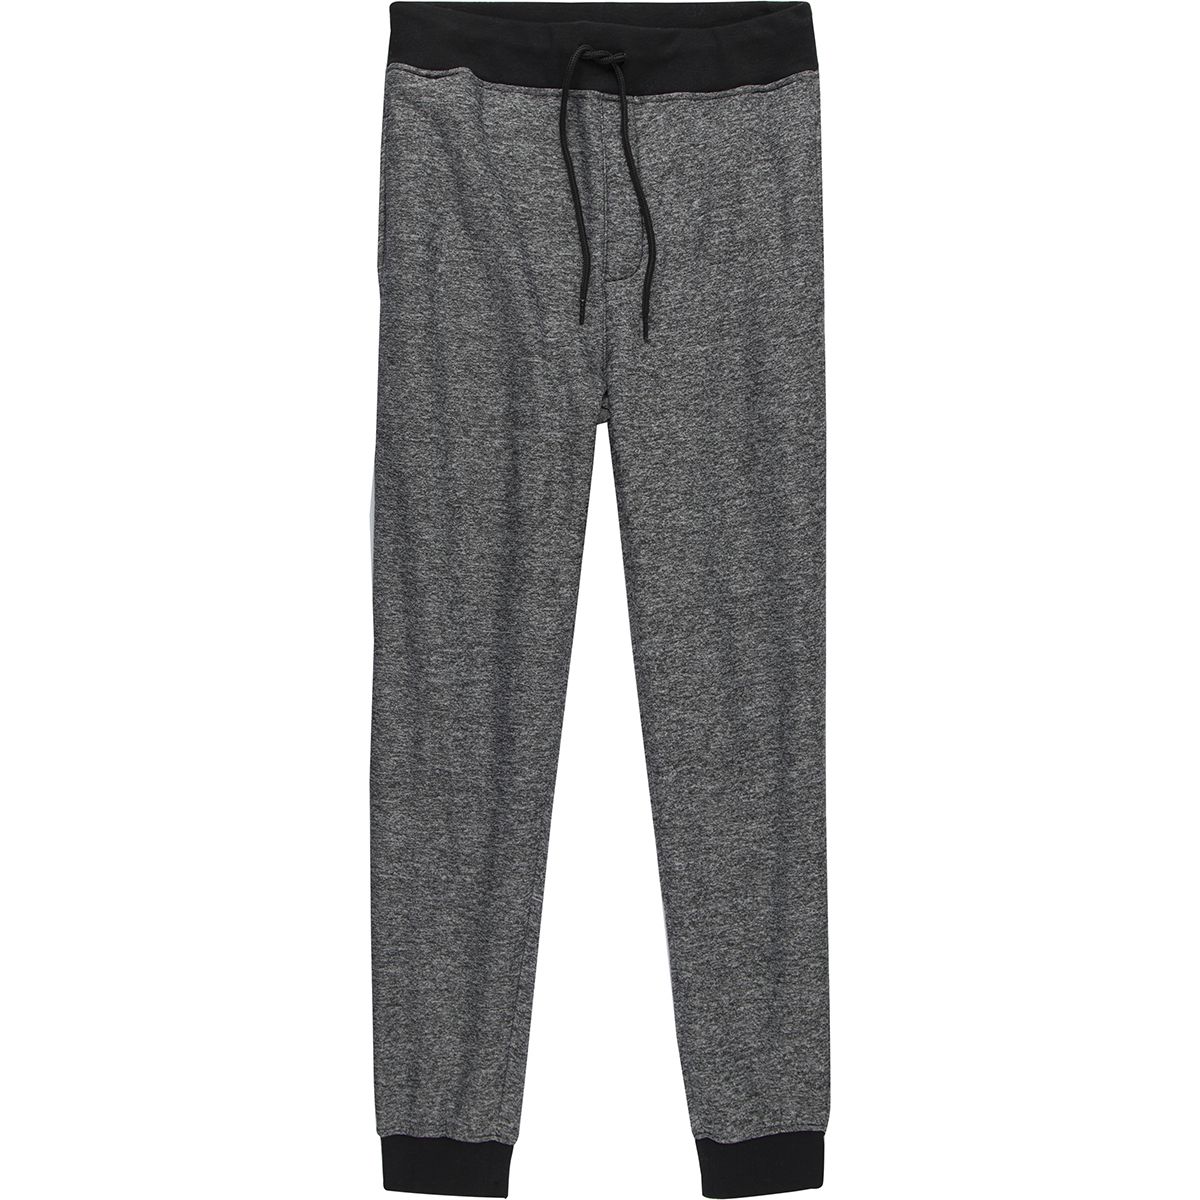 Stoic Sherpa Lined Sweatpant - Men's - Clothing